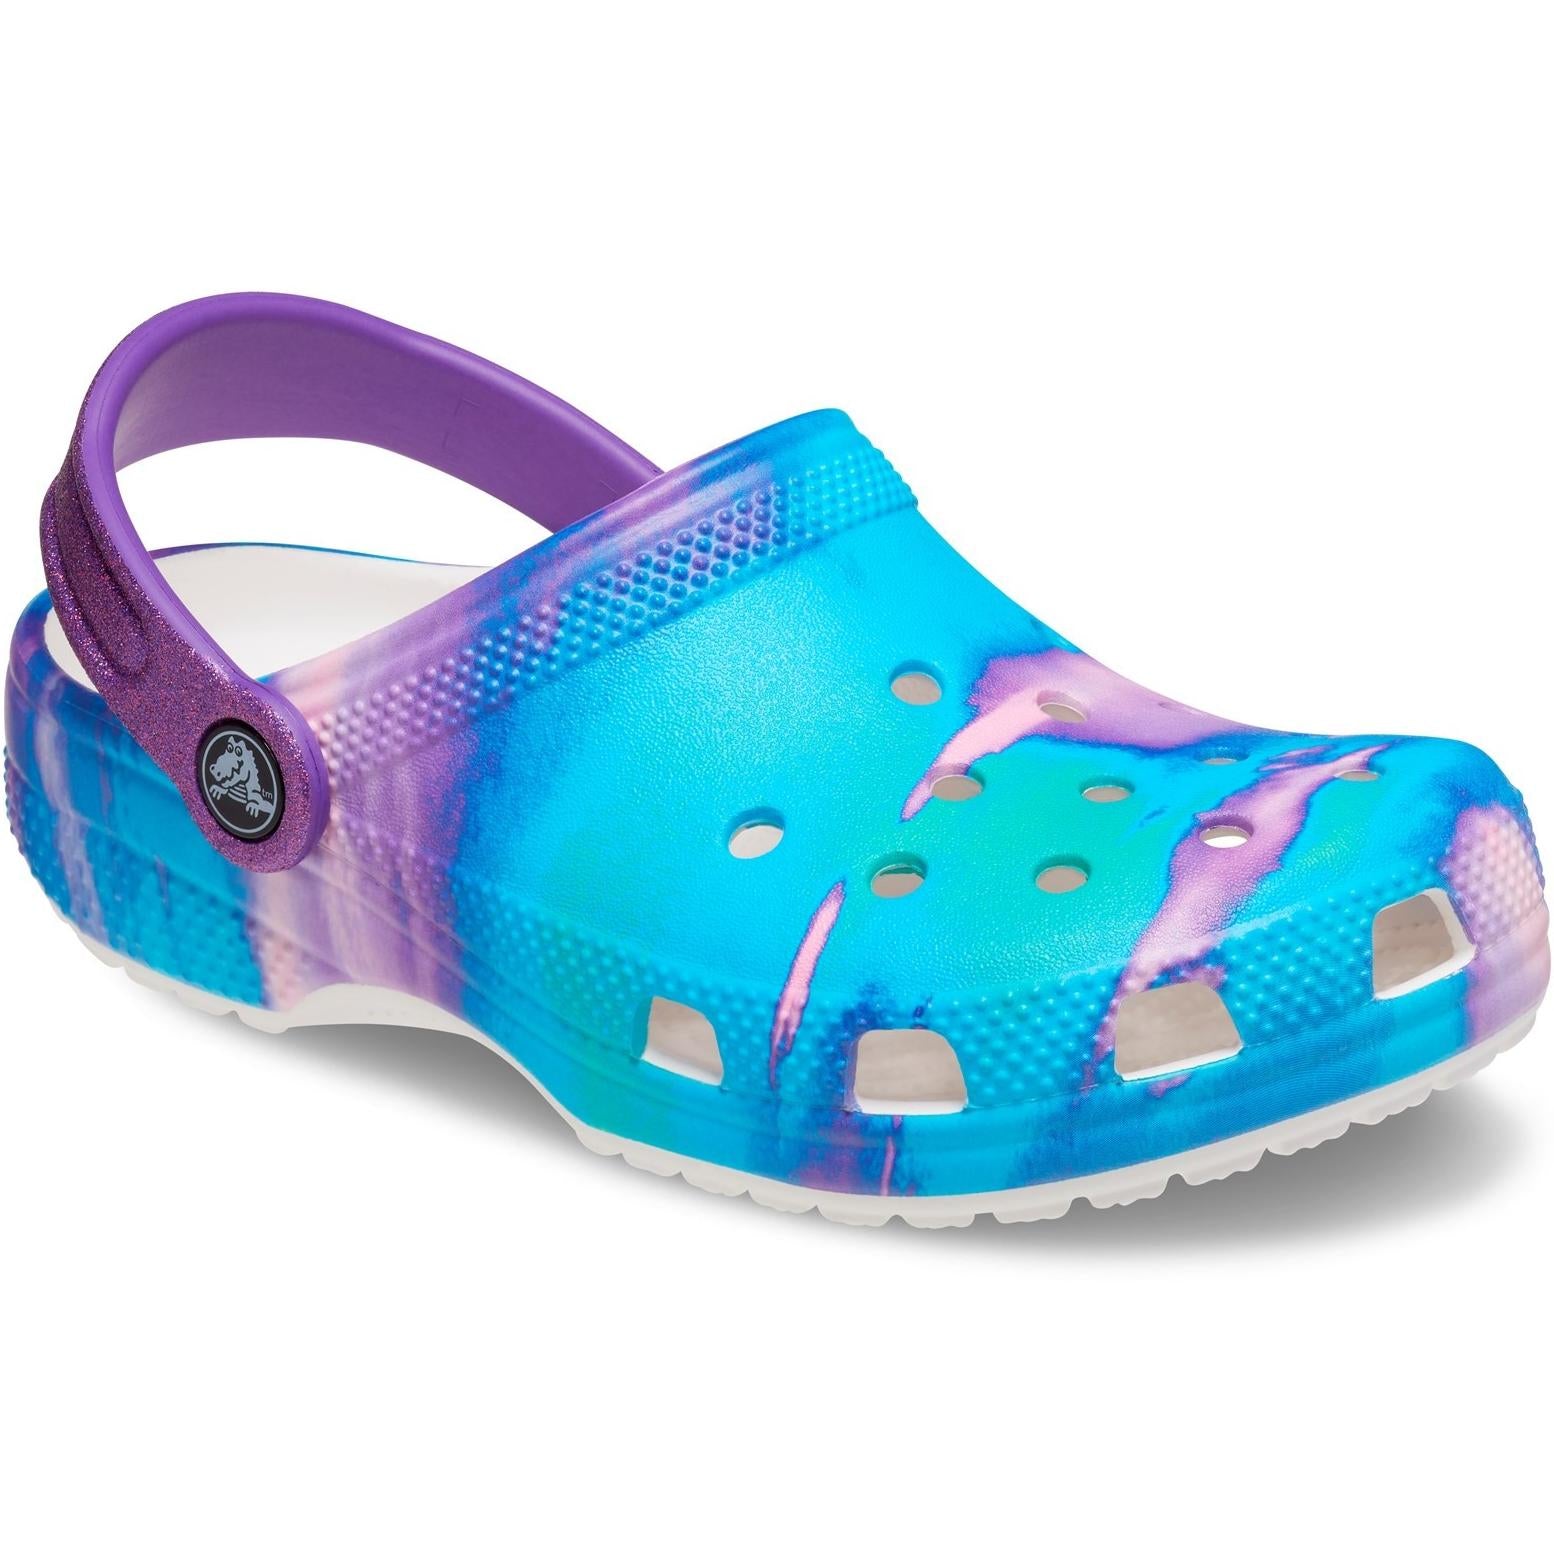 Crocs Classic Out Of This World II Clog Shoes